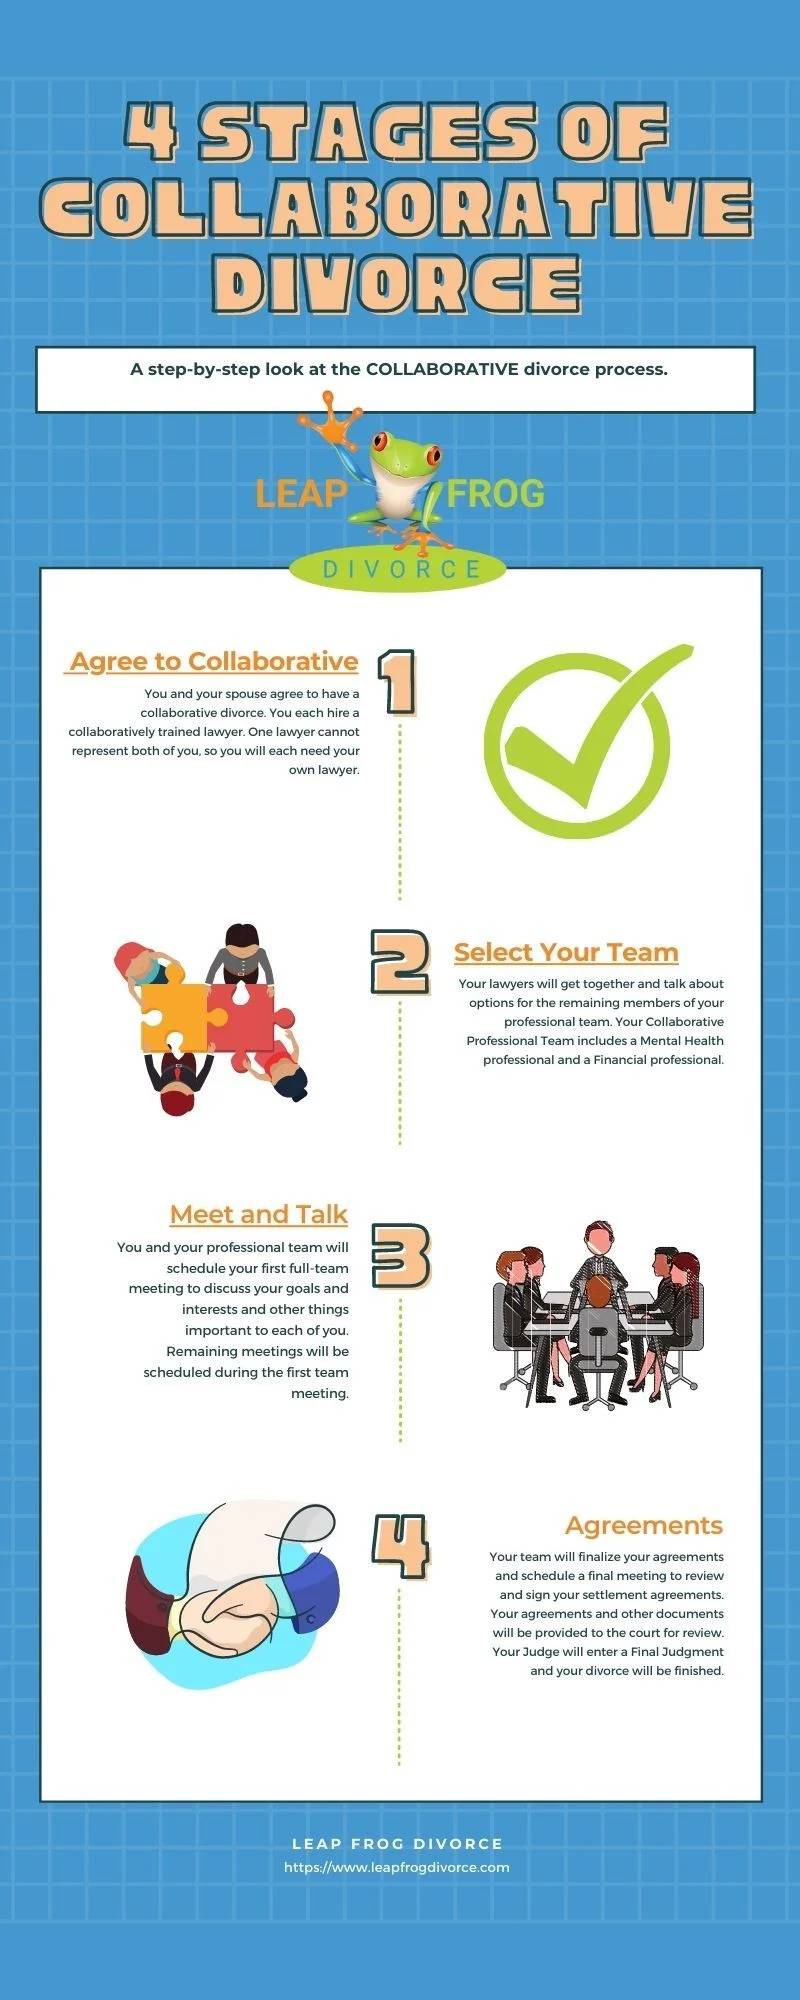 4 Stages of Collaborative Divorce infographic